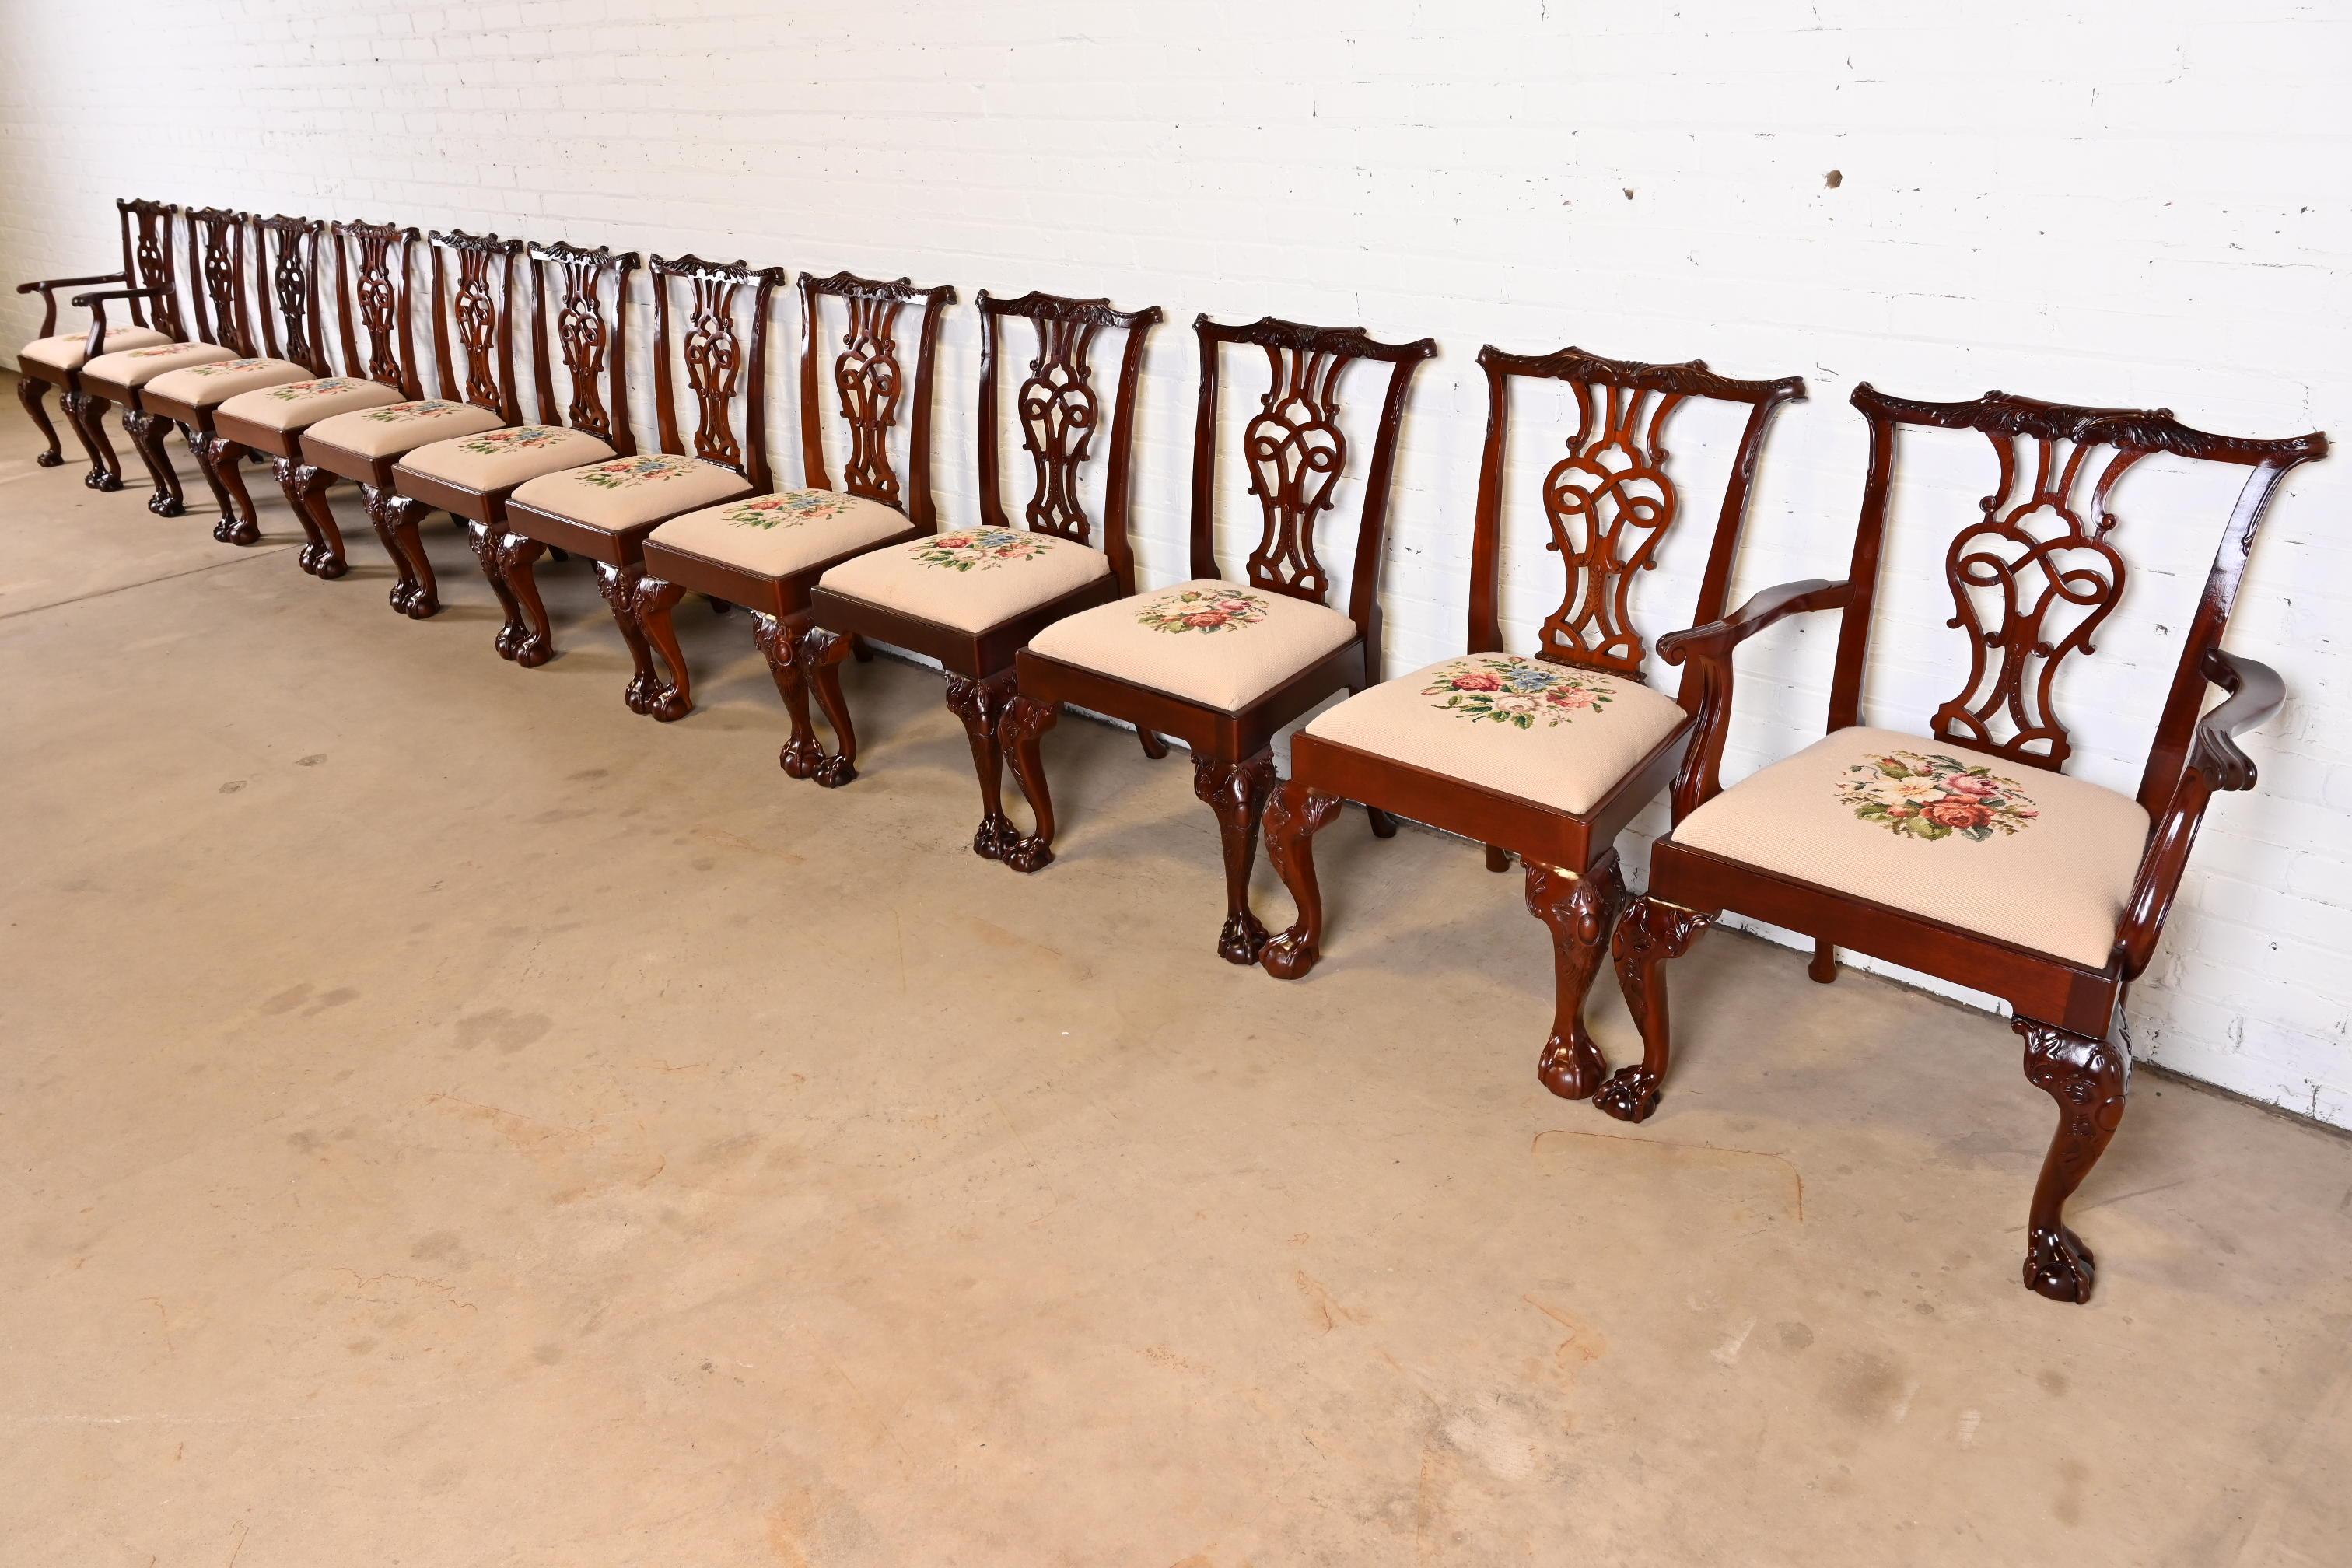 An outstanding set of twelve English Chippendale or Georgian style dining chairs

By Baker Furniture

USA, late 20th century

Carved mahogany, with custom floral needlepoint upholstered seats.

Measures:
Side chairs - 24.5